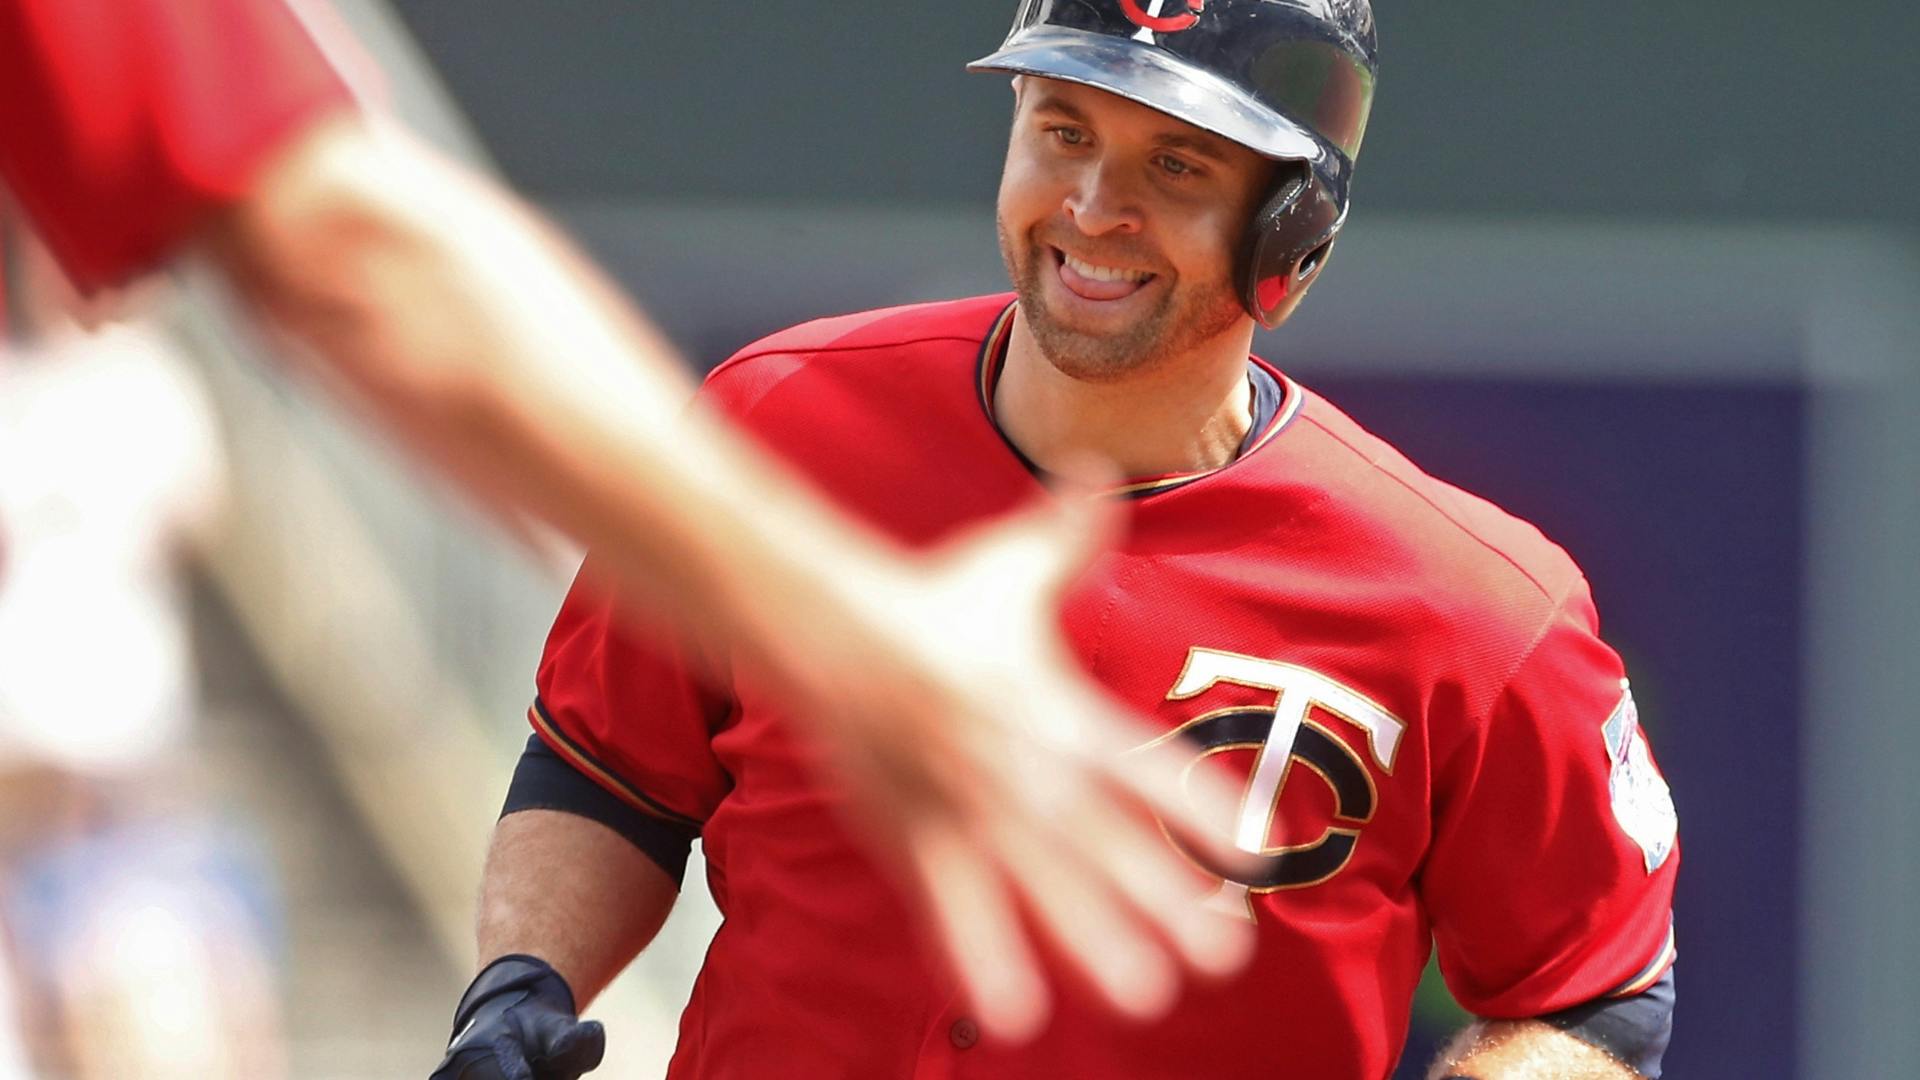 Twins second baseman Brian Dozier says it was awkward taking a curtain call after hitting three home runs Monday, given that the Twins were losing 11-5 to the Royals at the time.